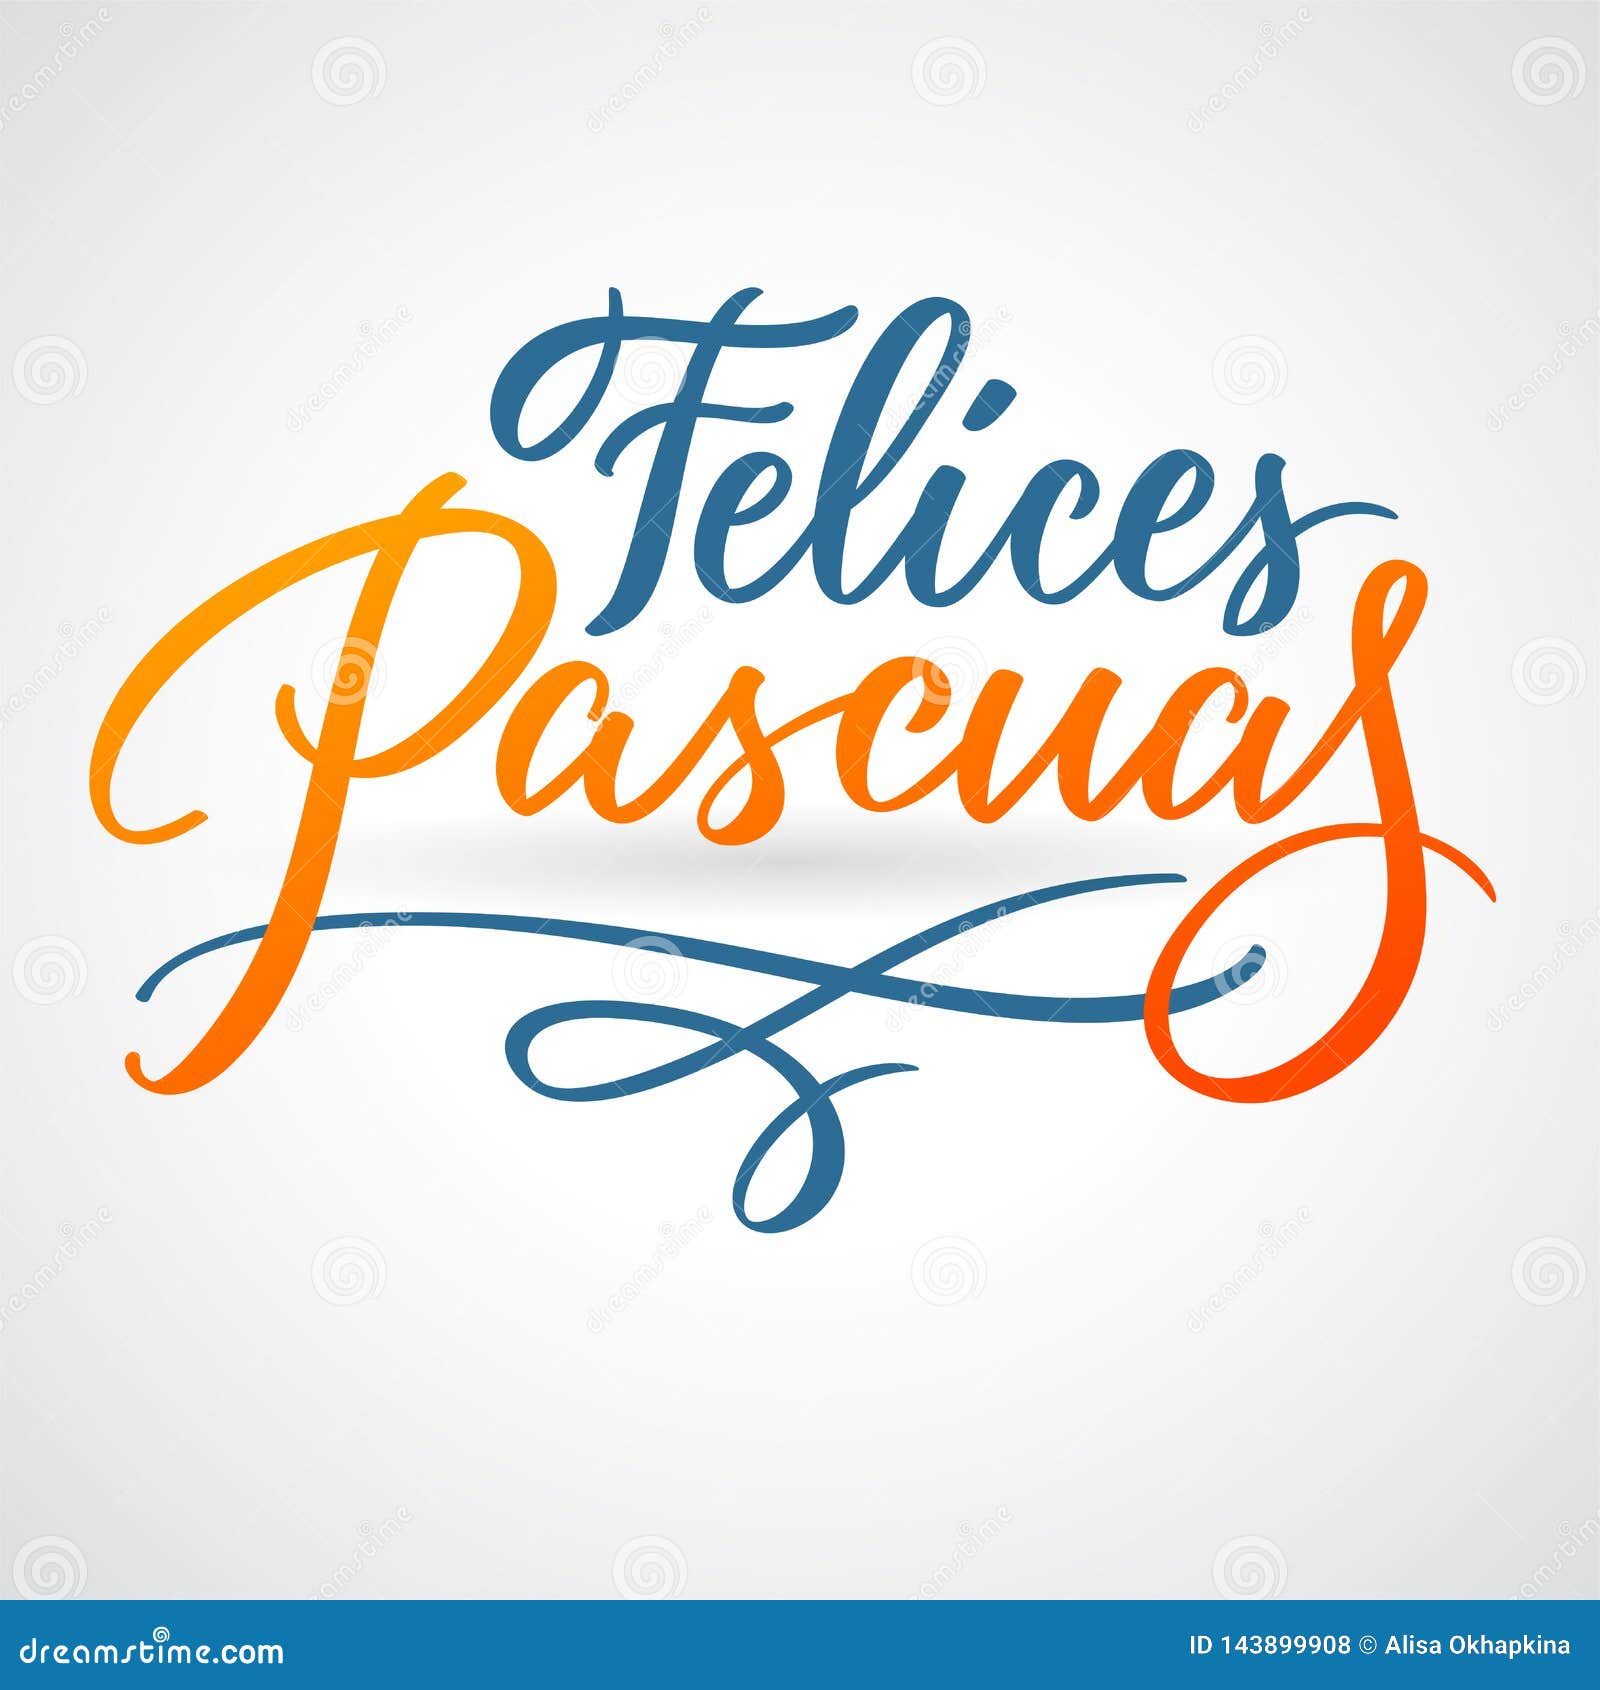 felices pascuas - easter greetings on spanish